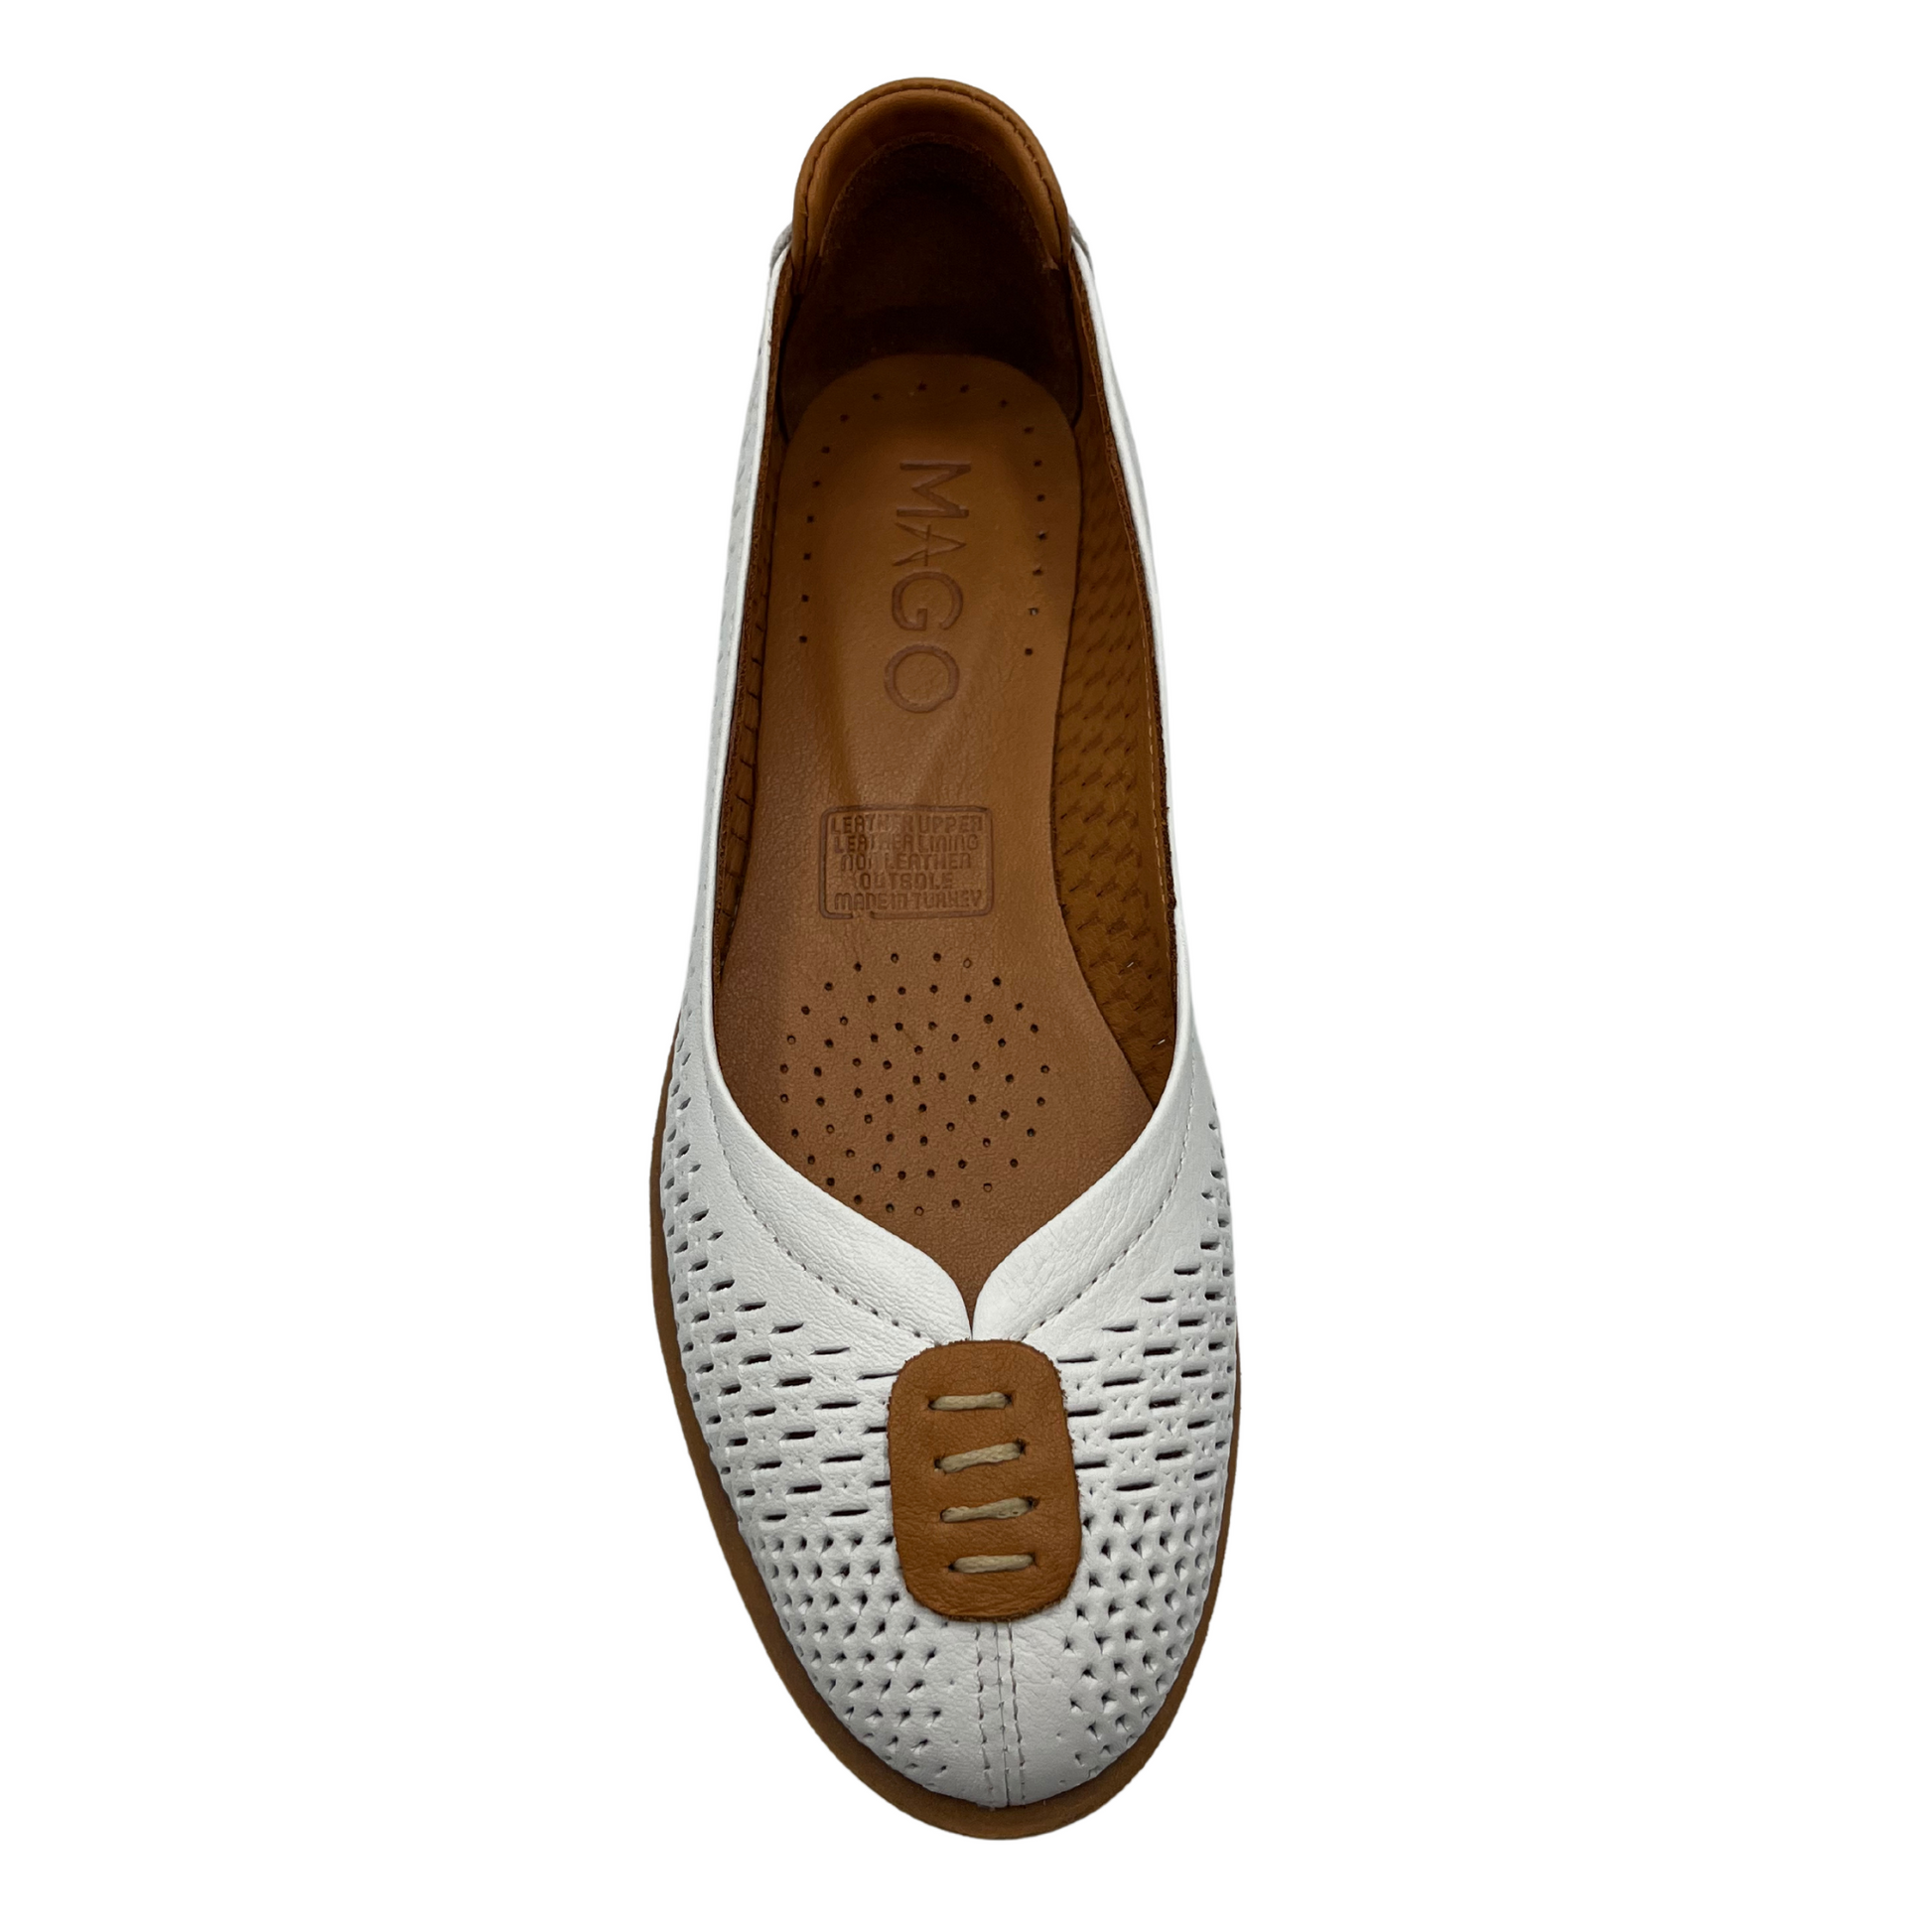 Top view of white perforated leather flat with thick outsole and leather lining